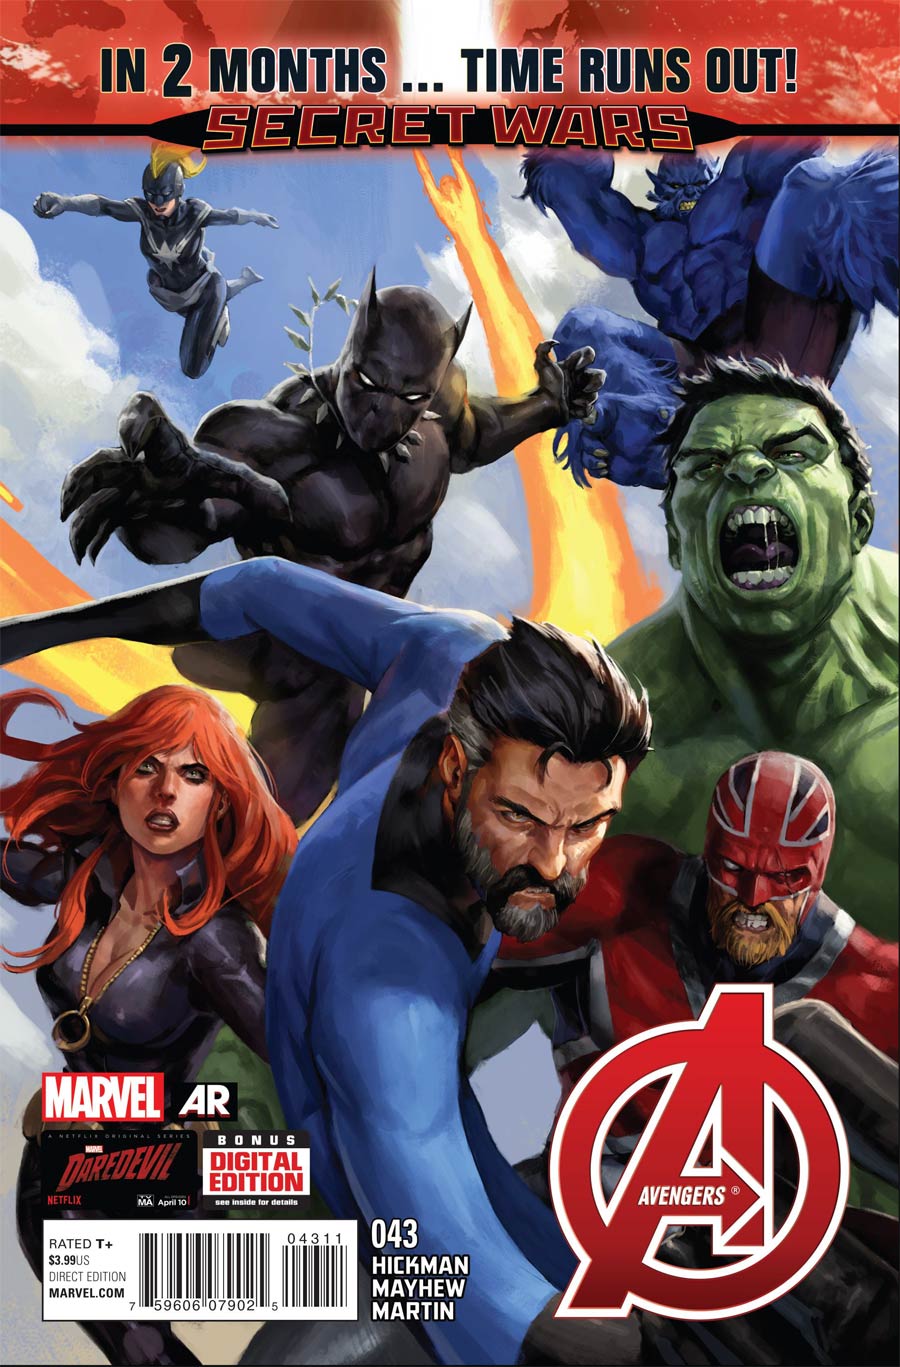 Avengers Vol 5 #43 (Time Runs Out Tie-In)